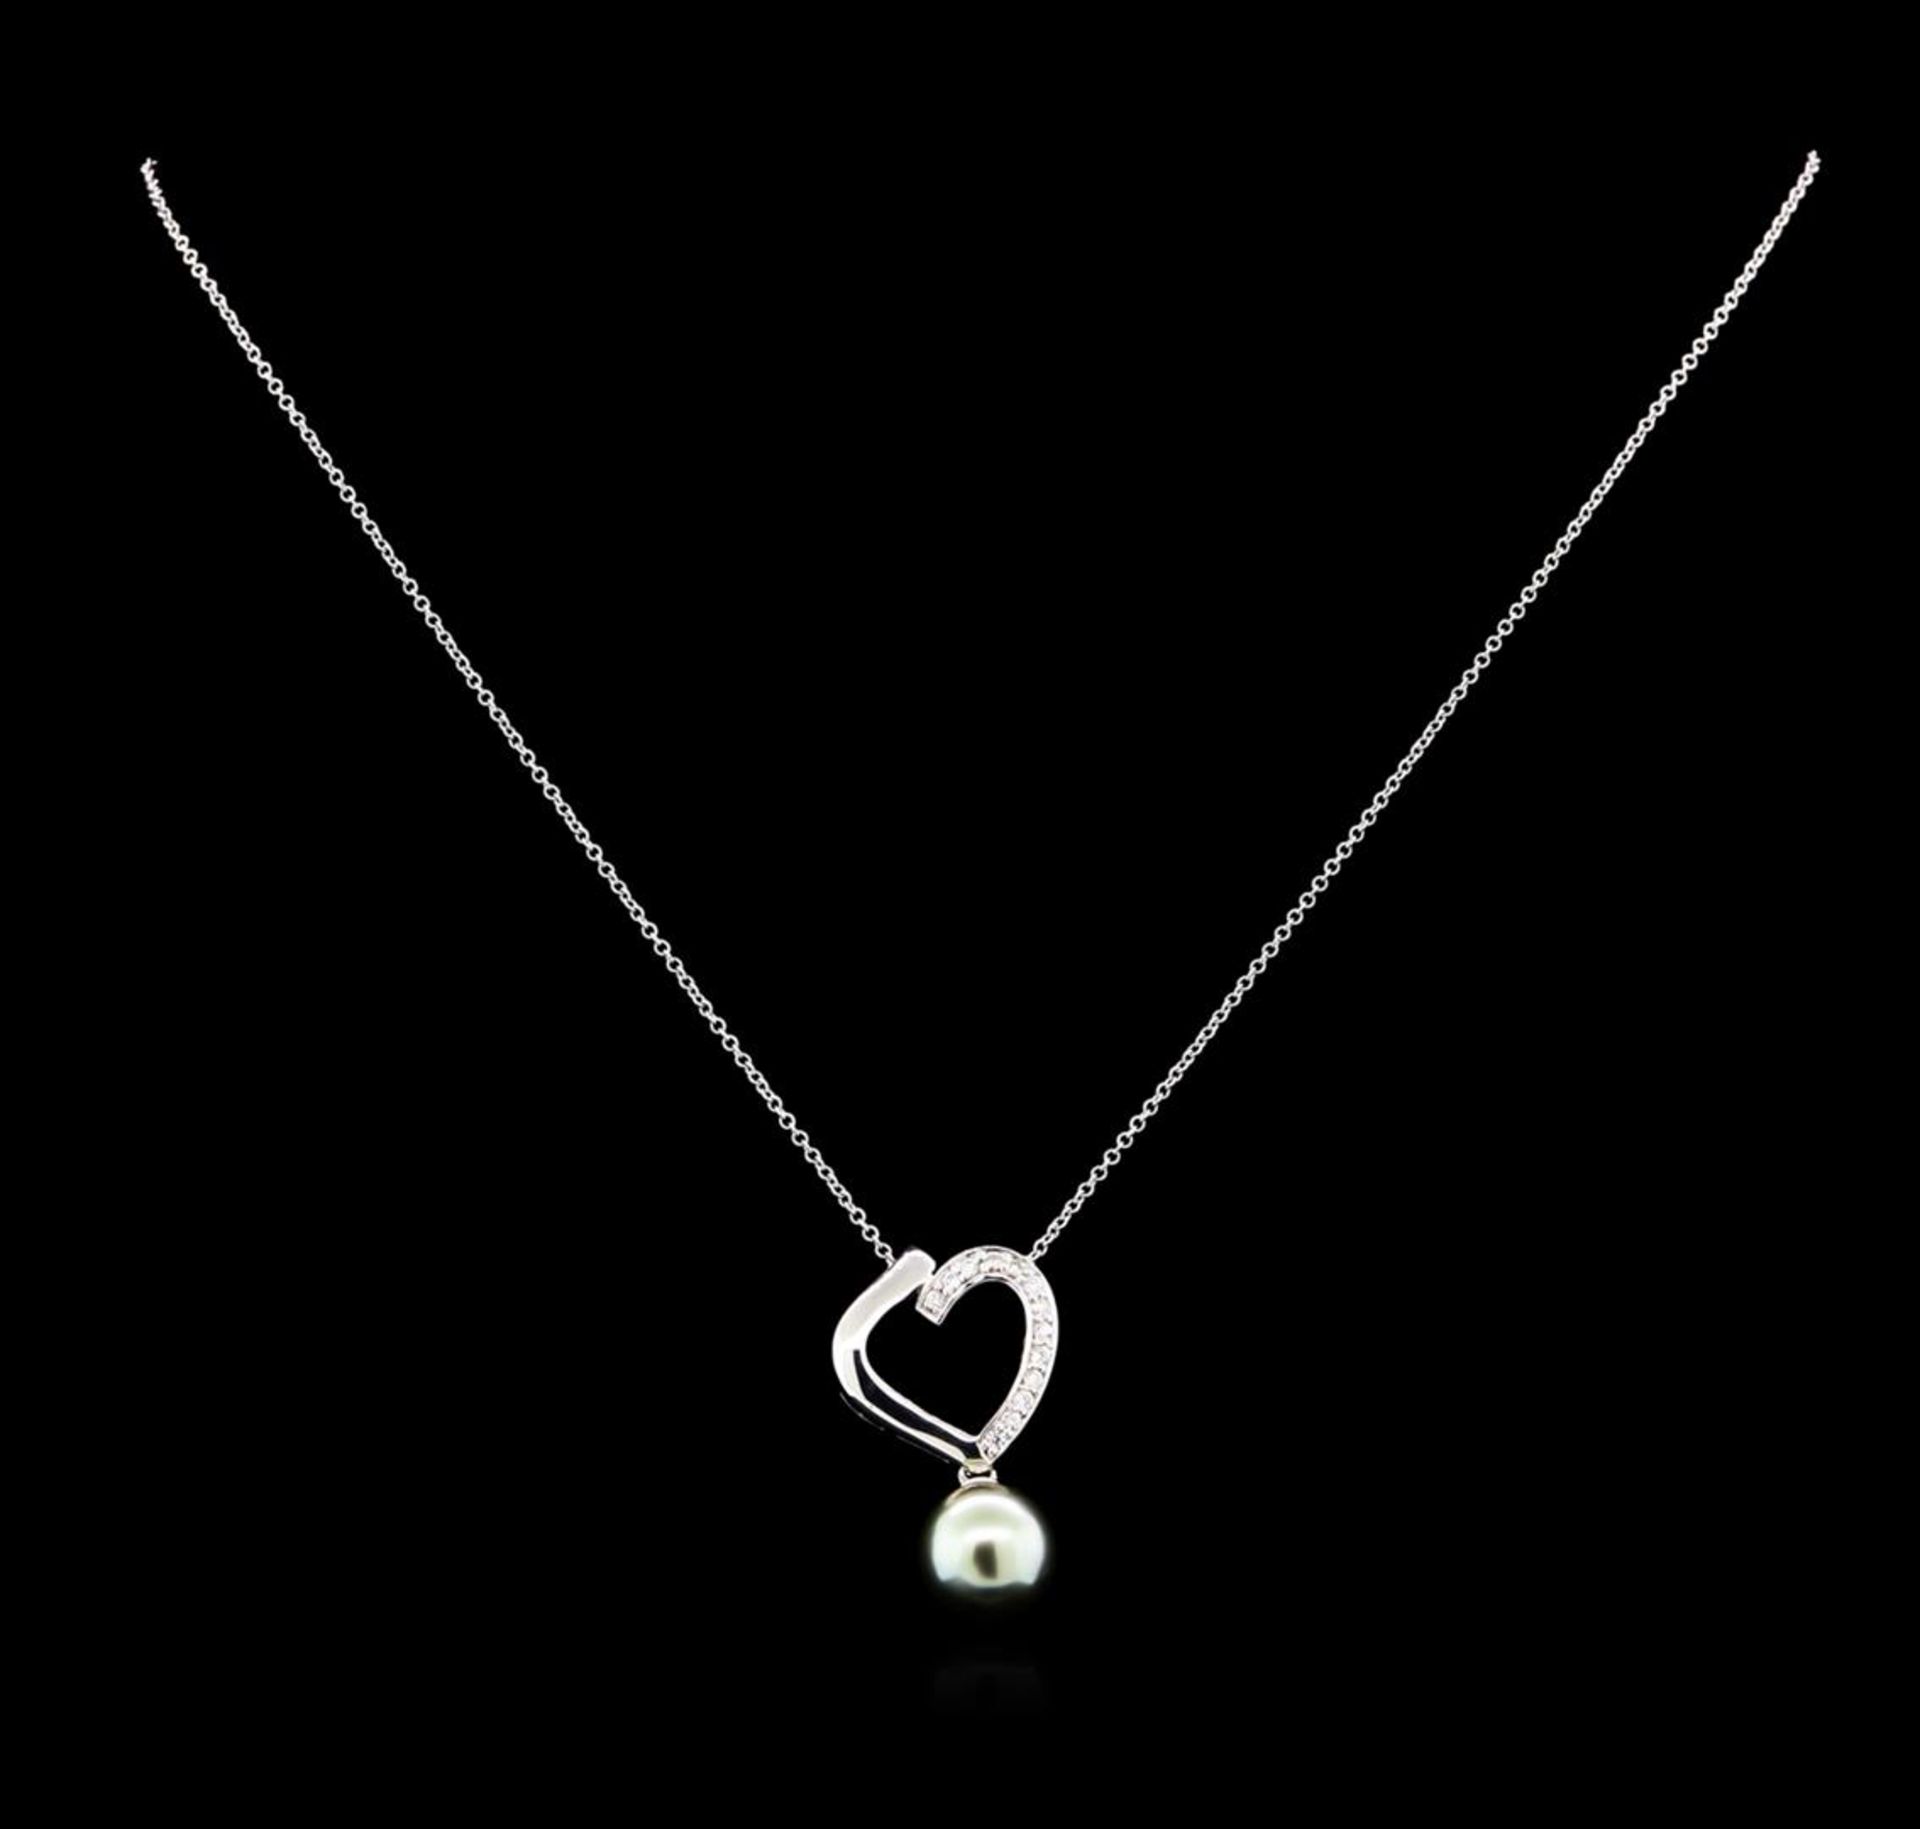 0.19 ctw Pearl and Diamond Pendant - 14KT White Gold - Image 2 of 2